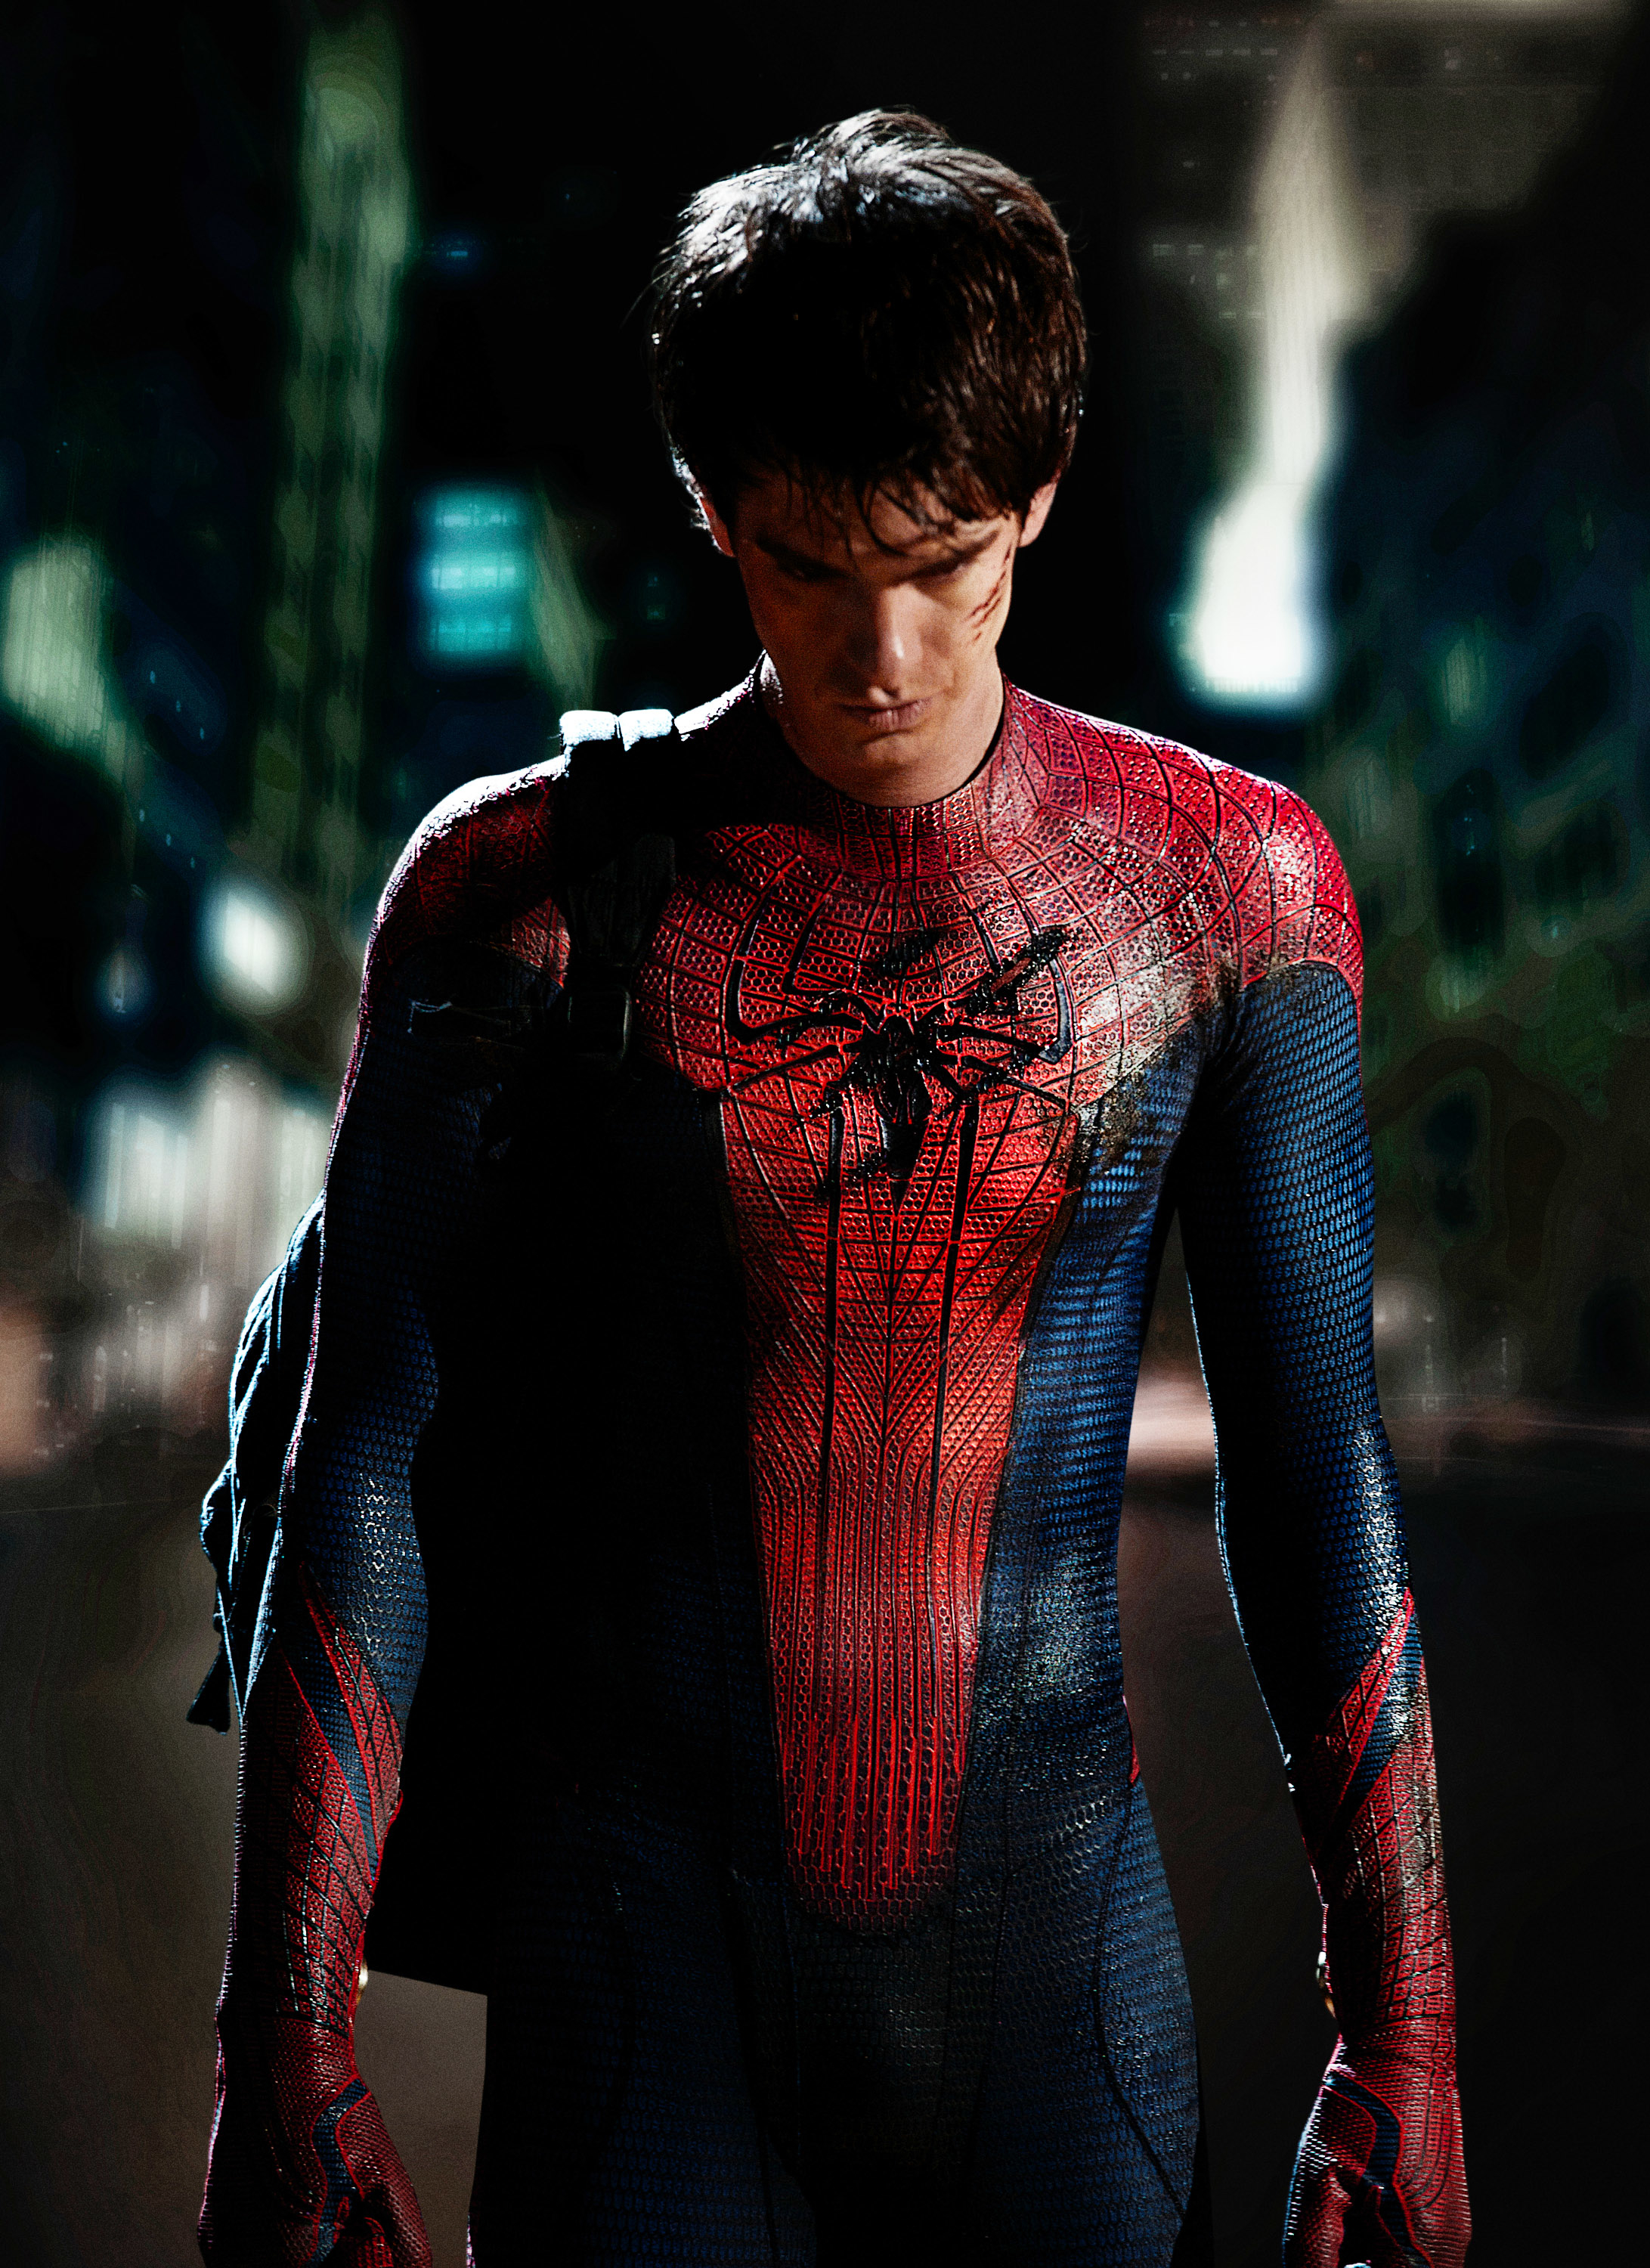 Andrew Garfield in a Spider-Man costume with a cityscape in the background